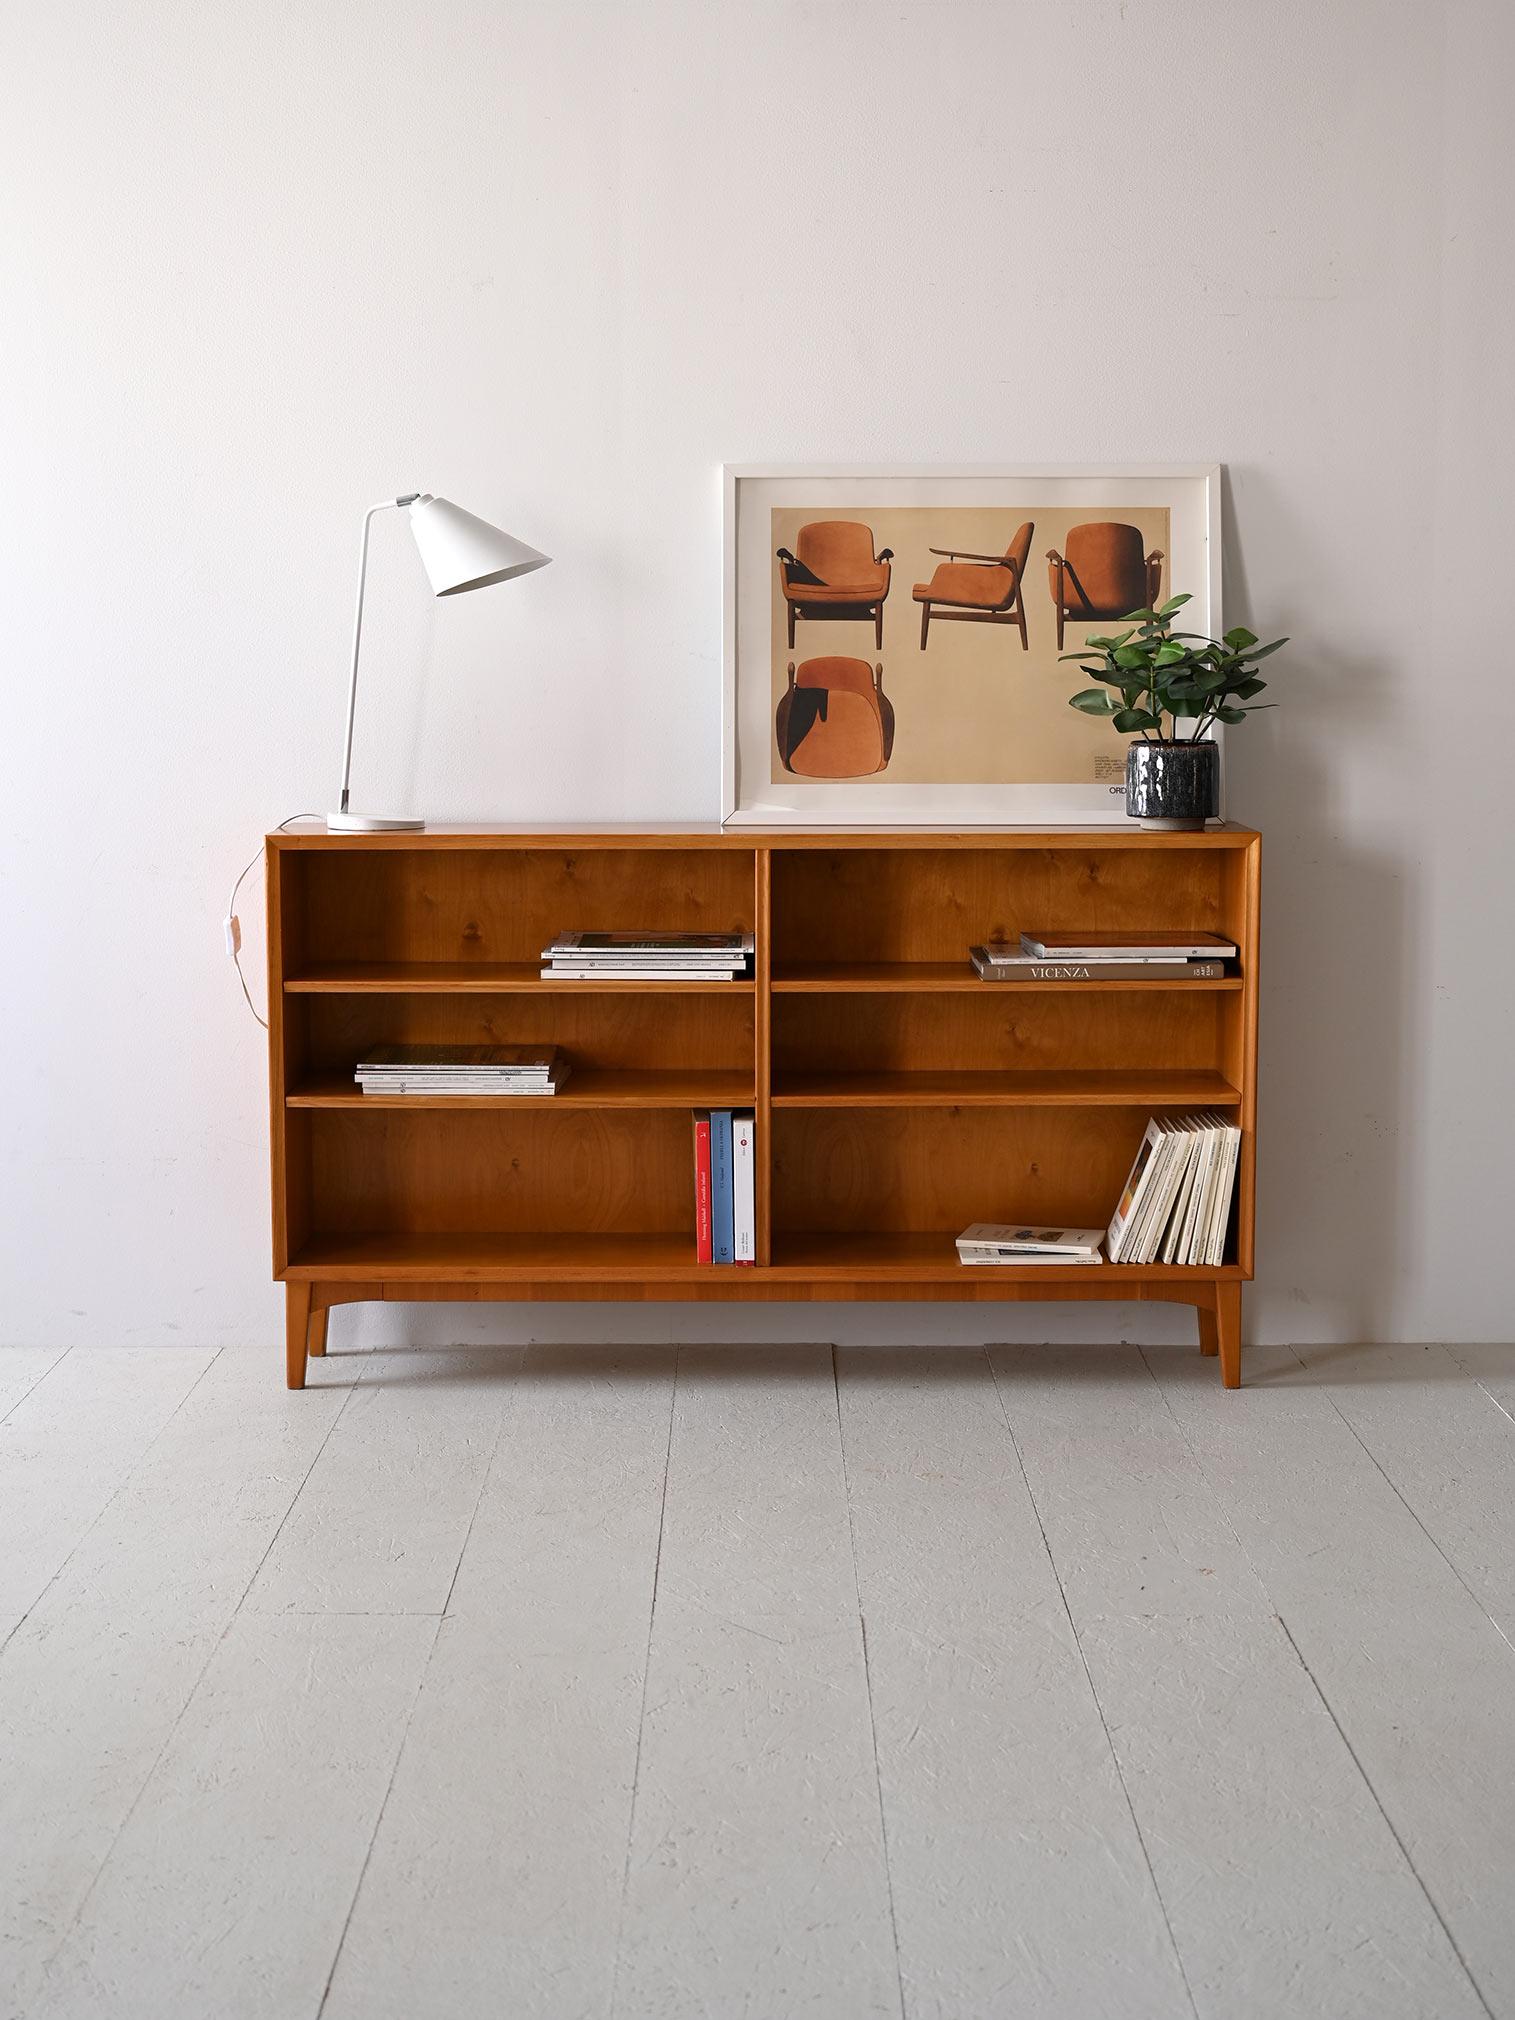 This Scandinavian bookcase, made in the 1950s, has four adjustable shelves that provide flexibility in organizing space. 
The wood, with its warm tone and natural grain, adds an element of character while maintaining a simple aesthetic.
The design